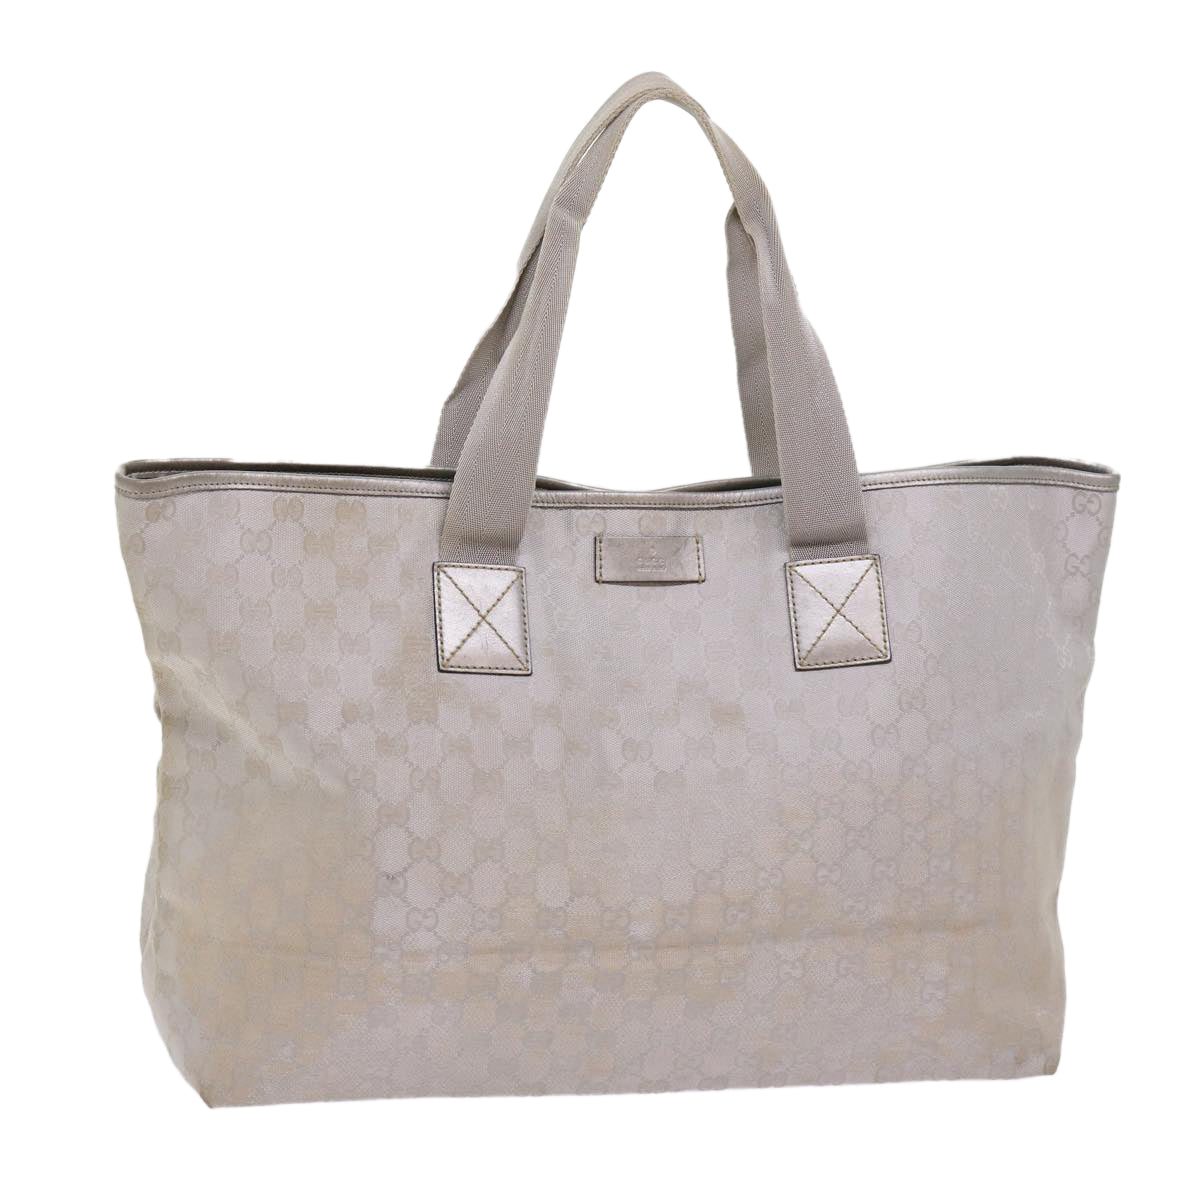 GUCCI GG Canvas Tote Bag Outlet Silver 267474 Auth 69367